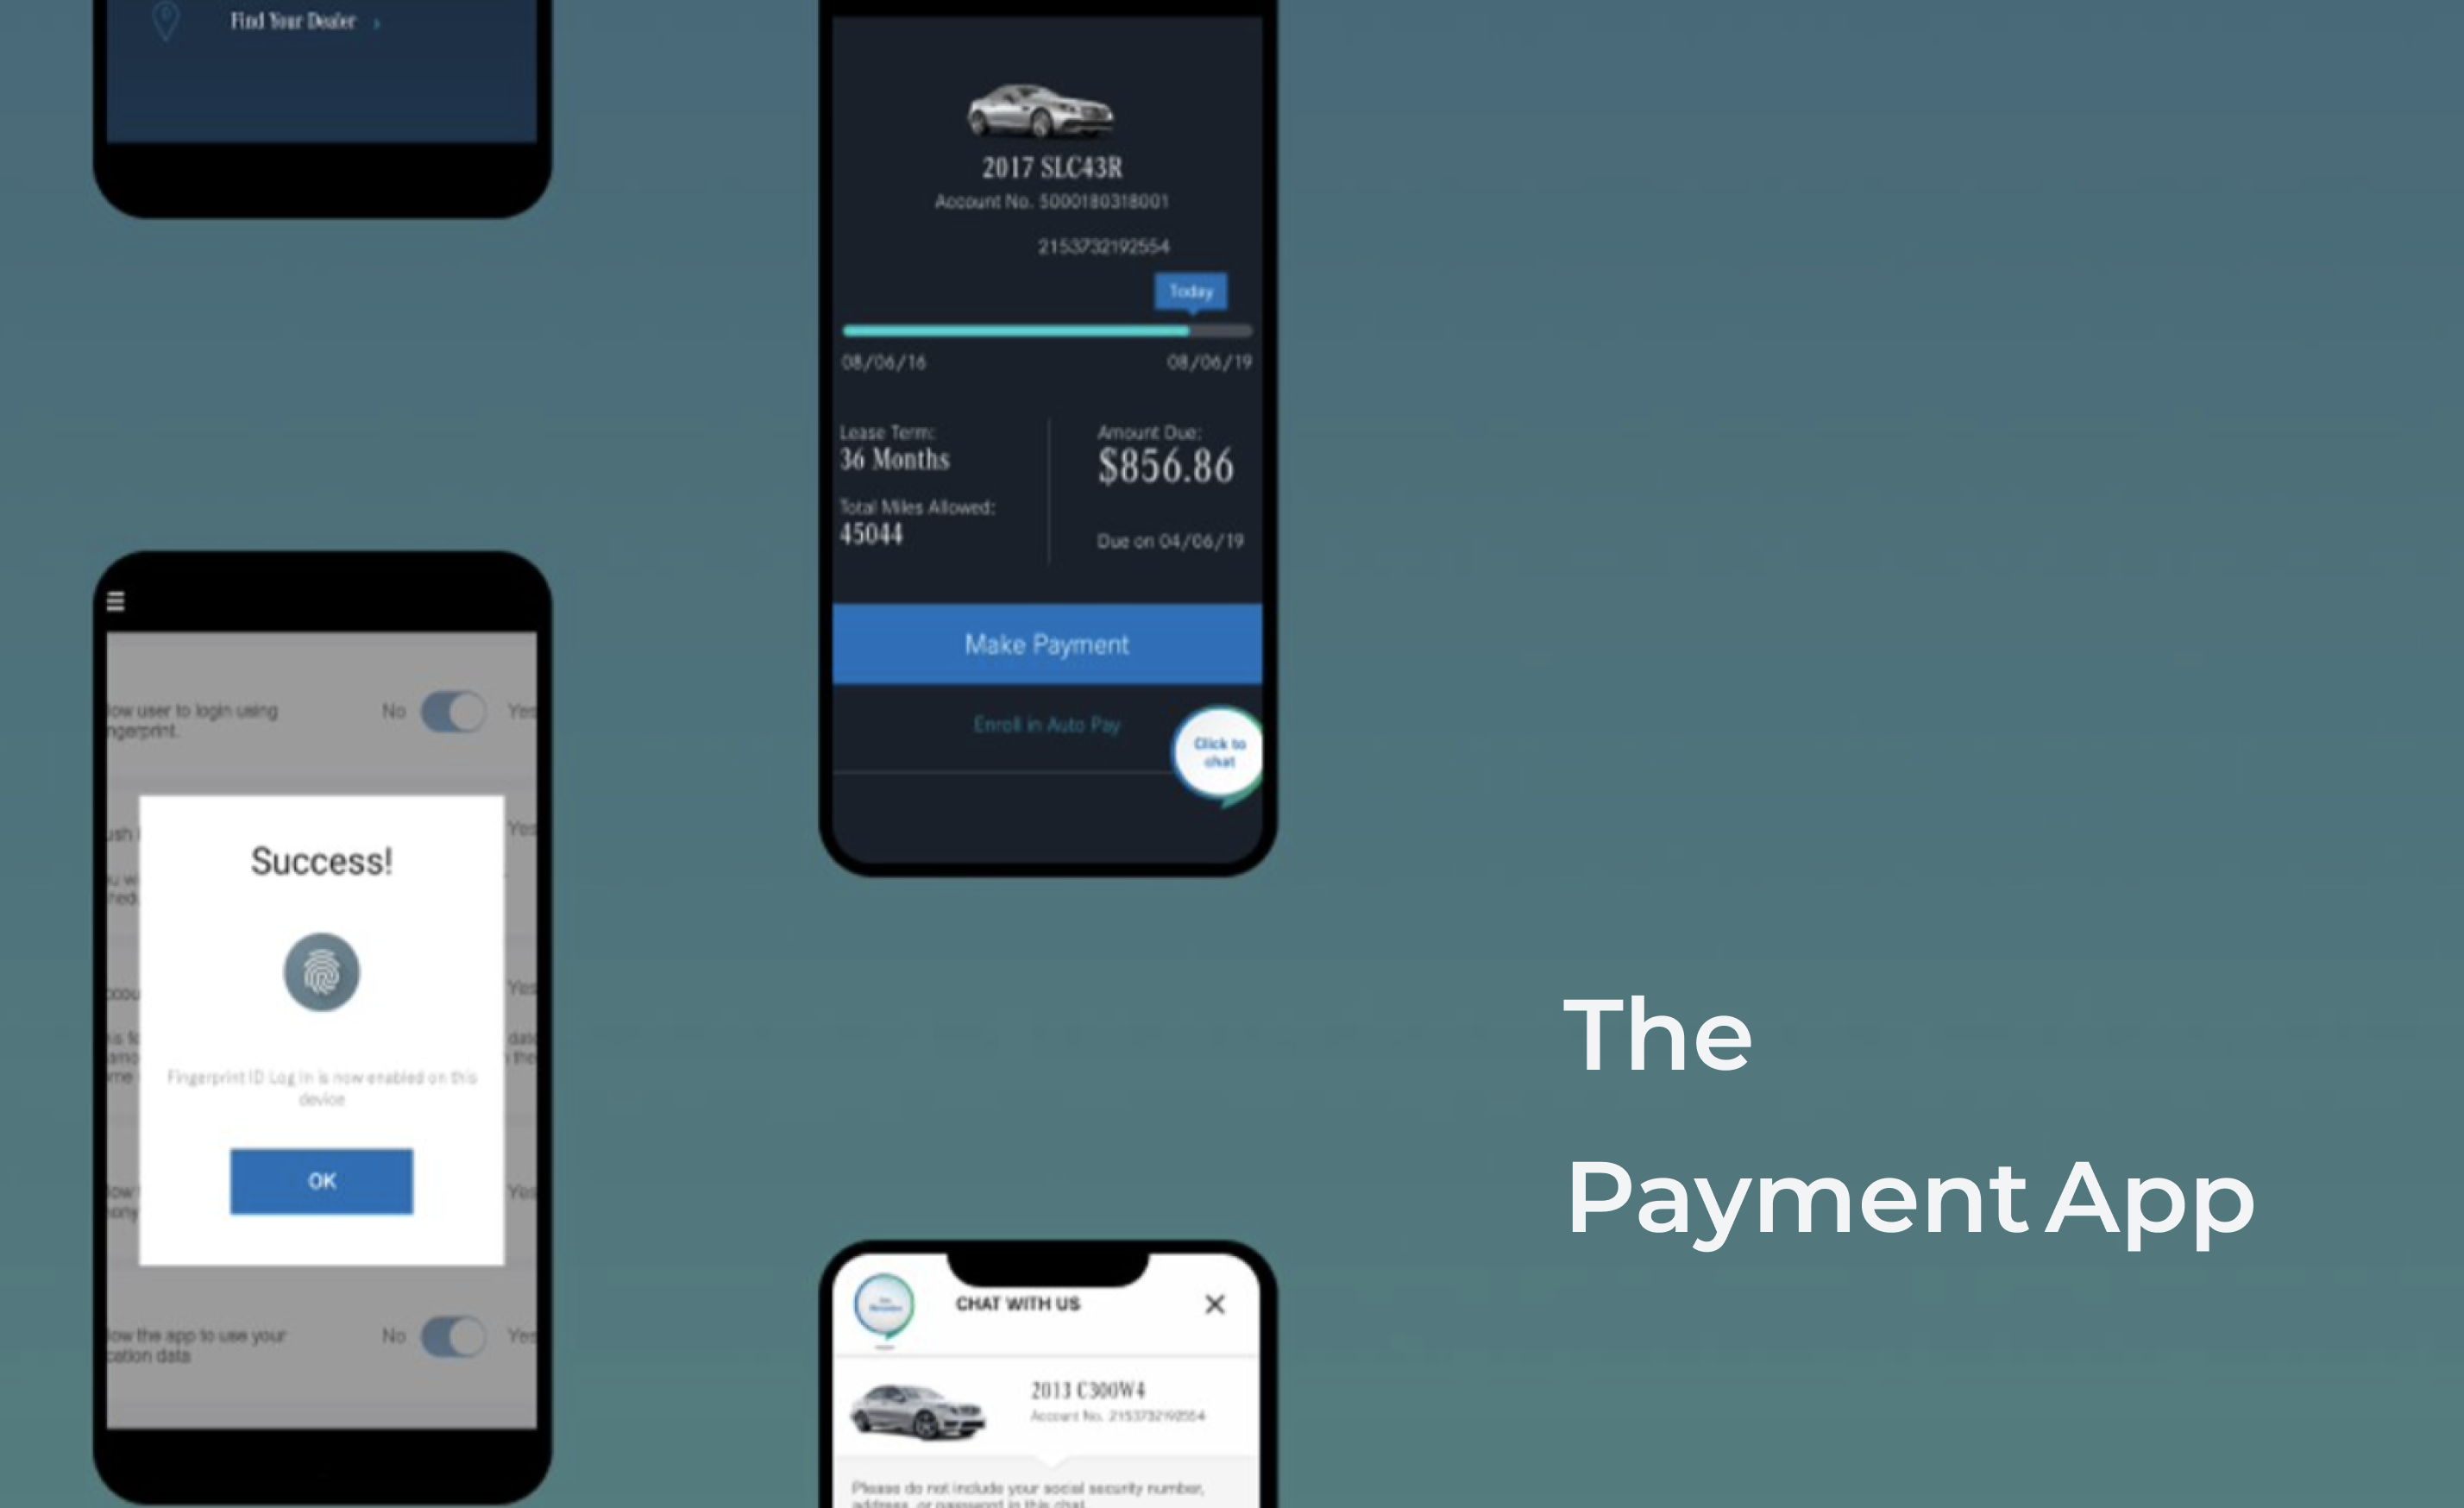 CHI Software case: the Payment App